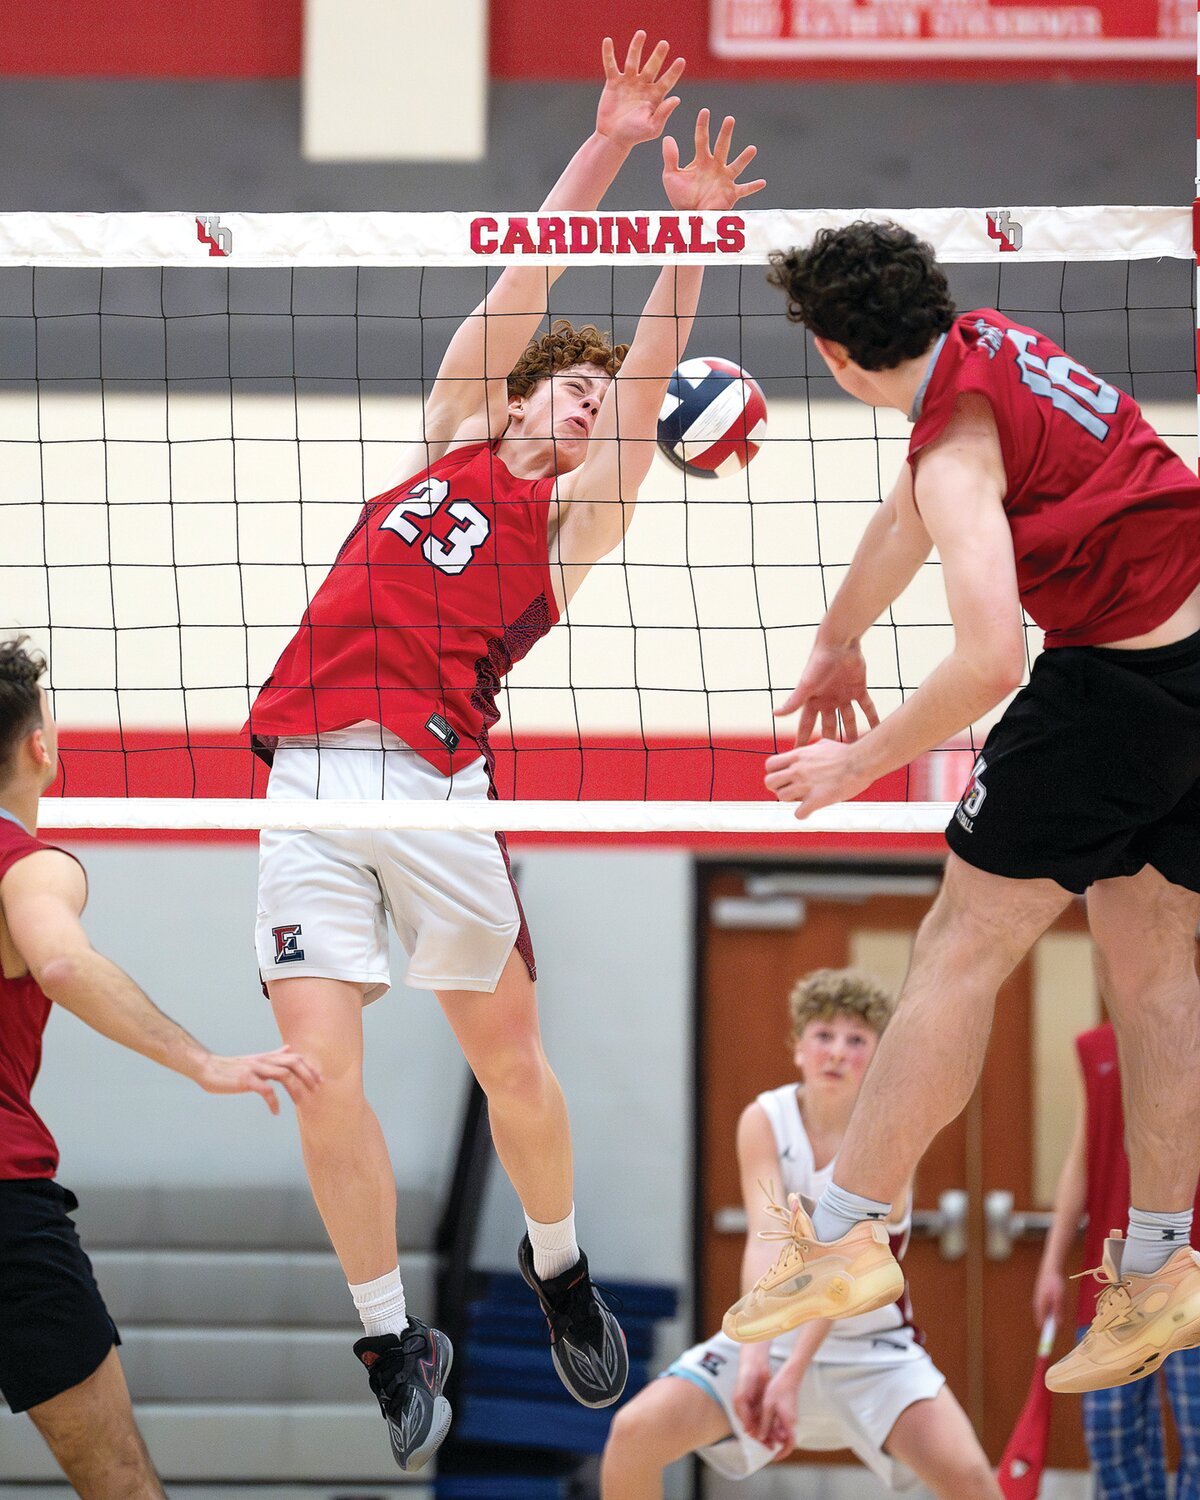 Central Bucks East’s Evan Blank twists to attempt a block on the spike from Upper Dublin’s Seanus Frayne.